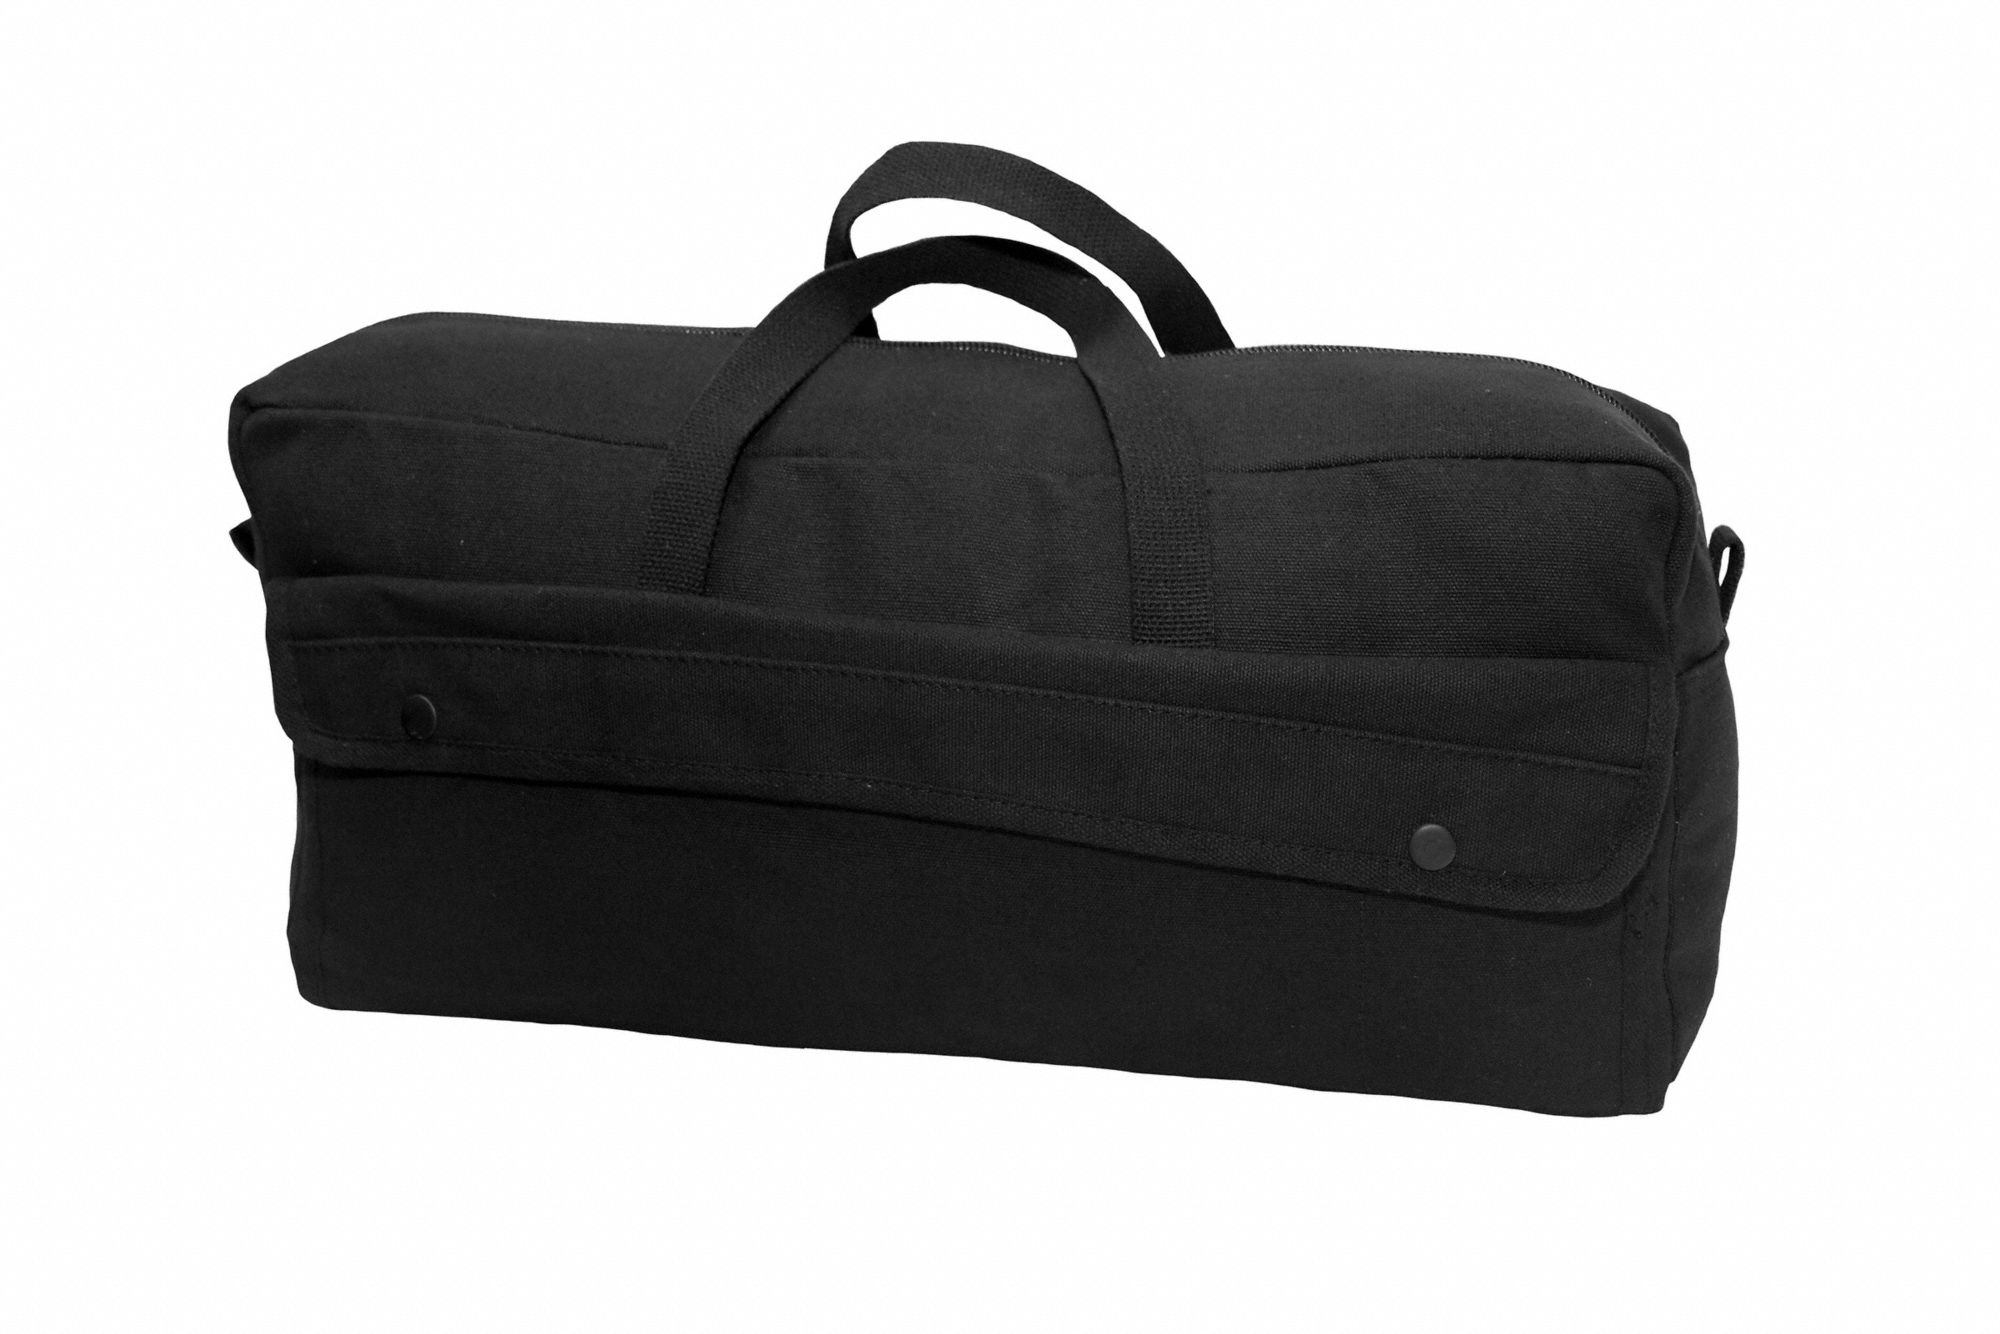 Tool Bag: Canvas, 4 Pockets, 19 in Overall Wd, 6 in Overall Dp, 9 in Overall Ht, Black